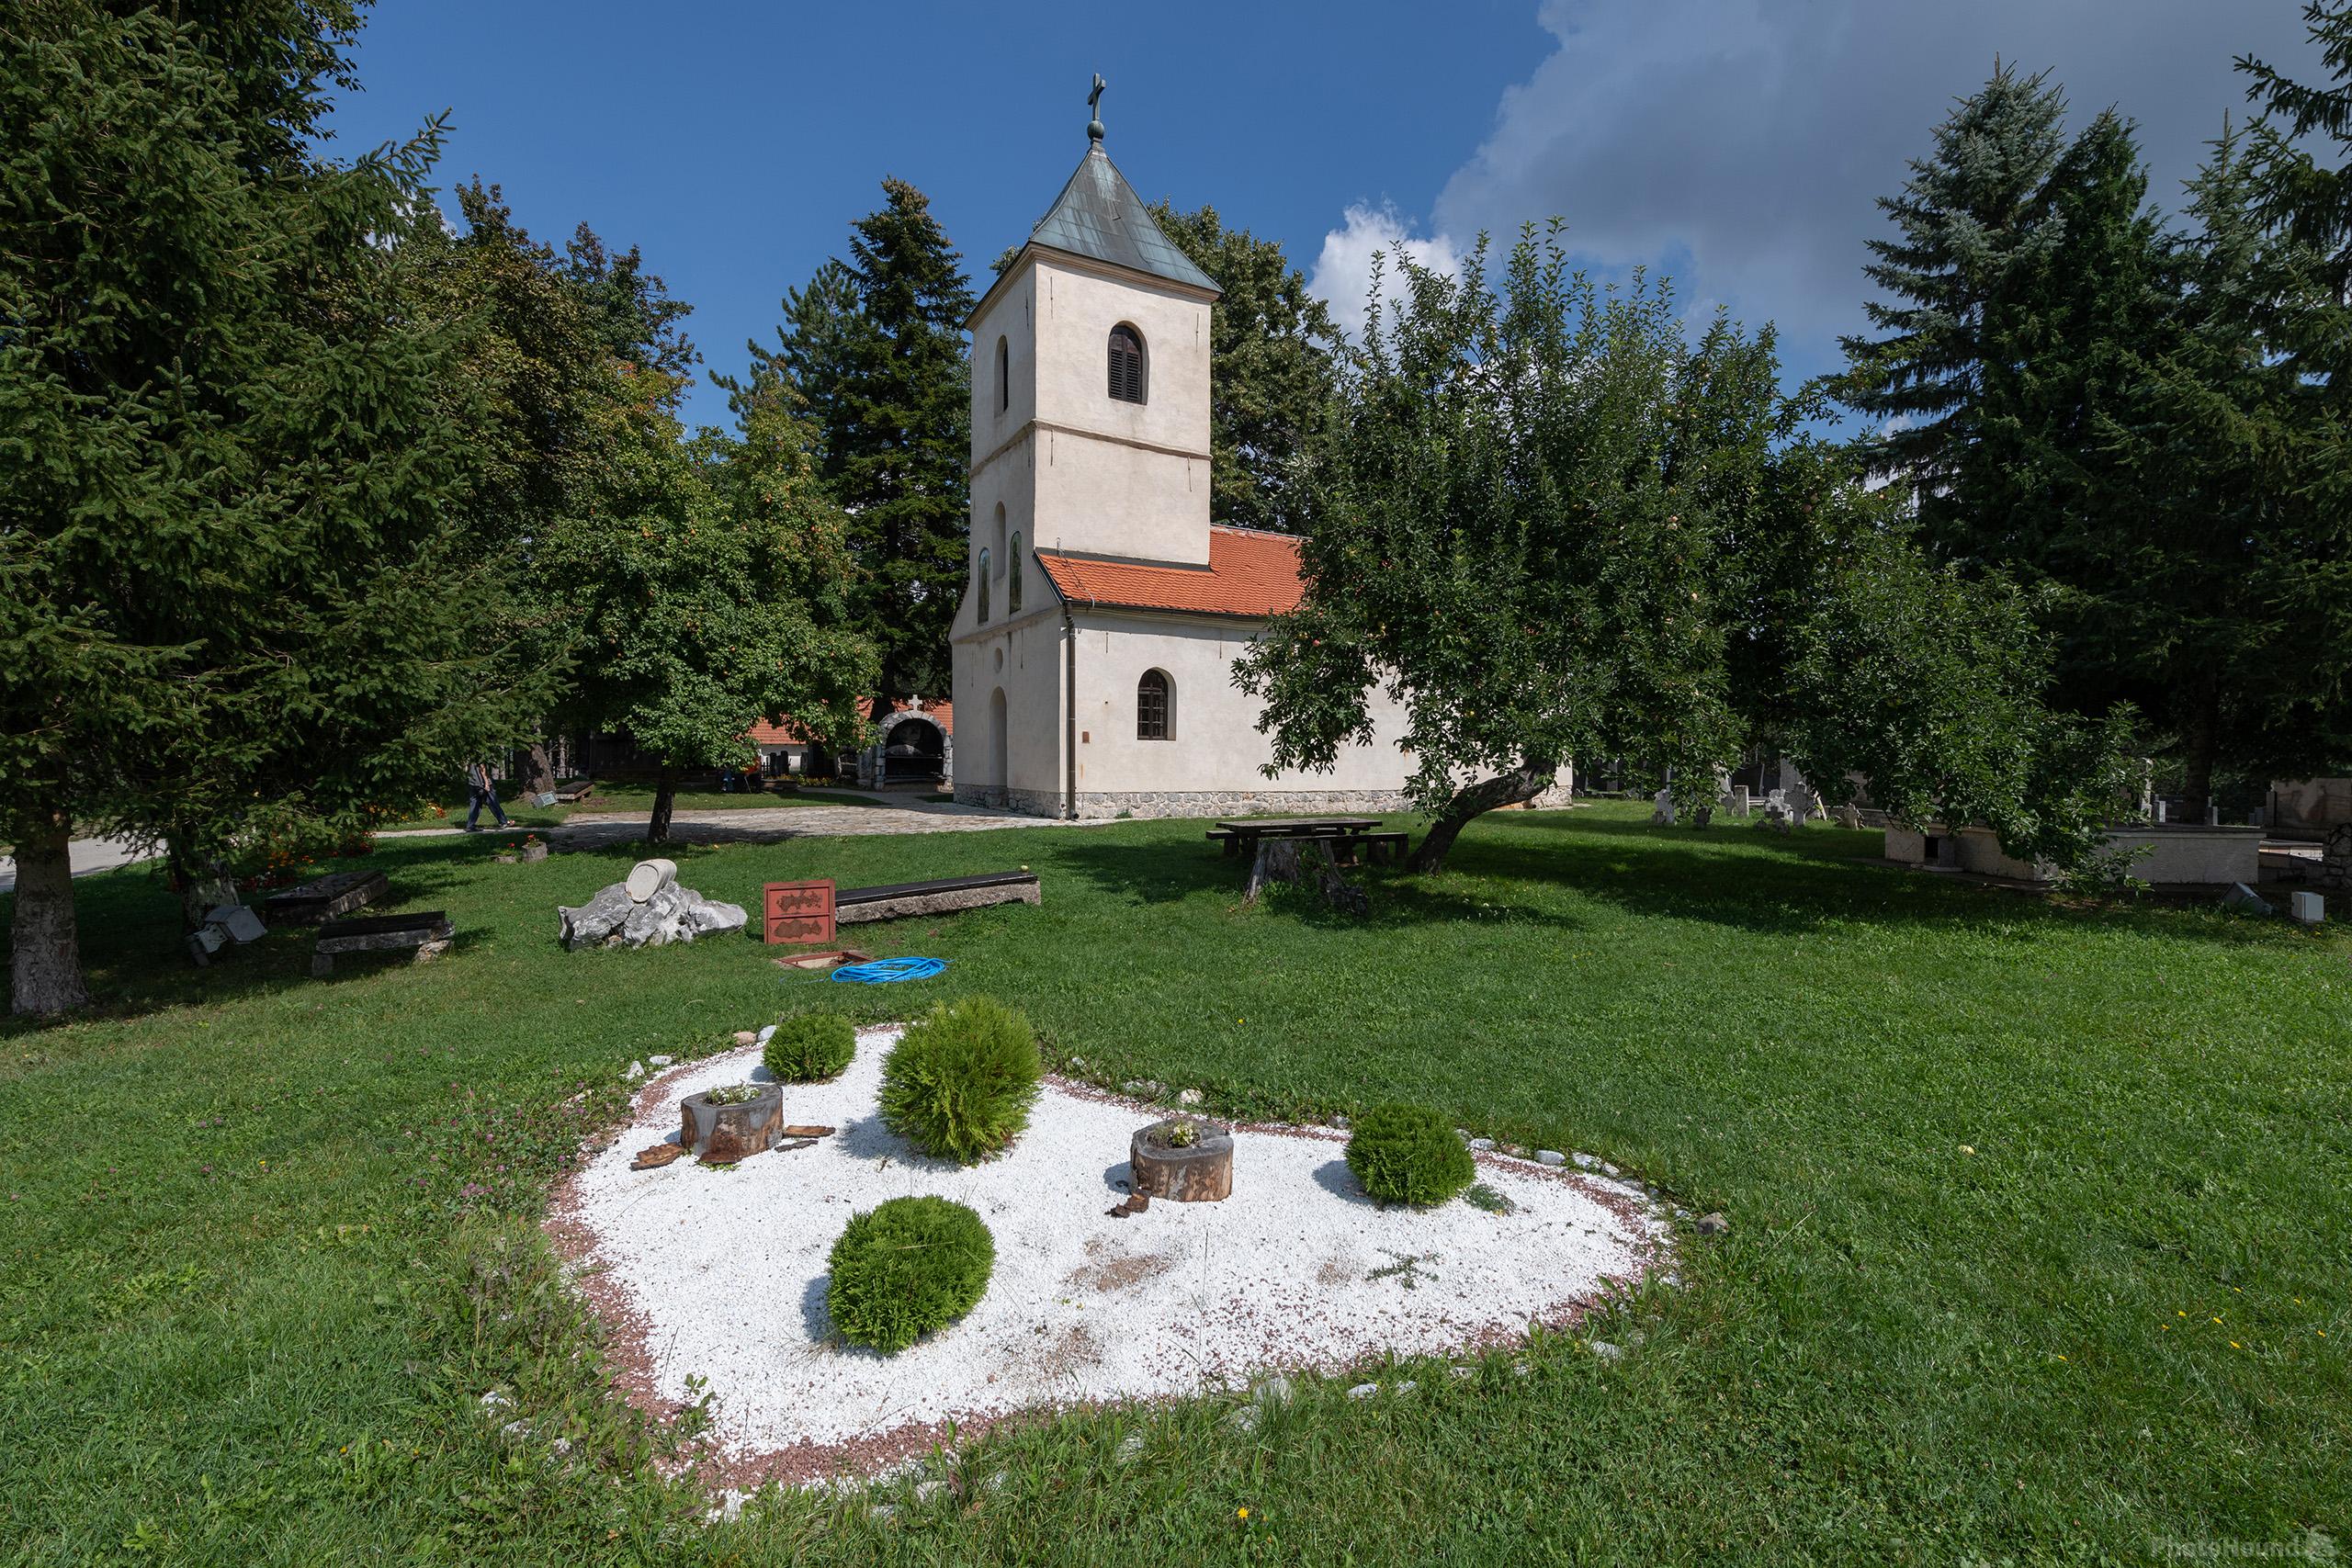 Image of Apostles Peter and Paul Church by Luka Esenko